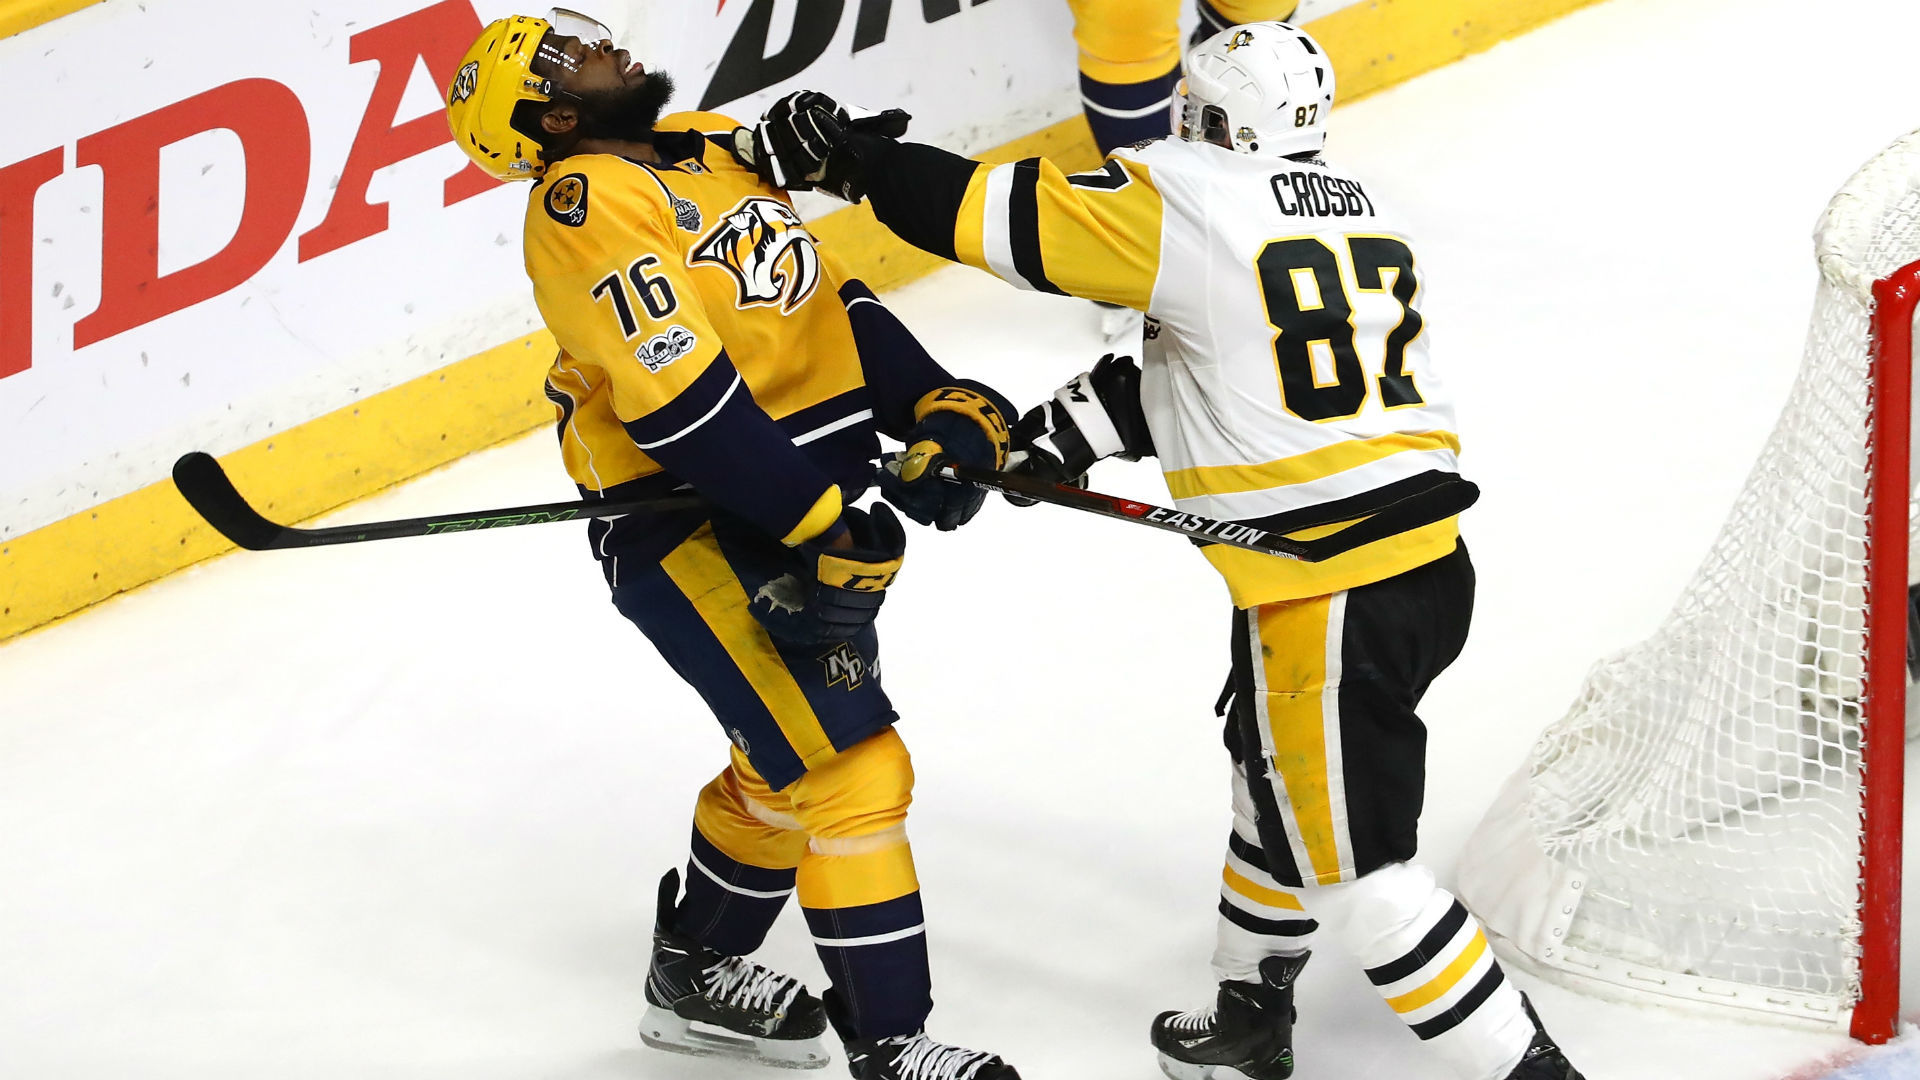 Sidney Crosby crushes P.K. Subban in fight behind the Penguins' net